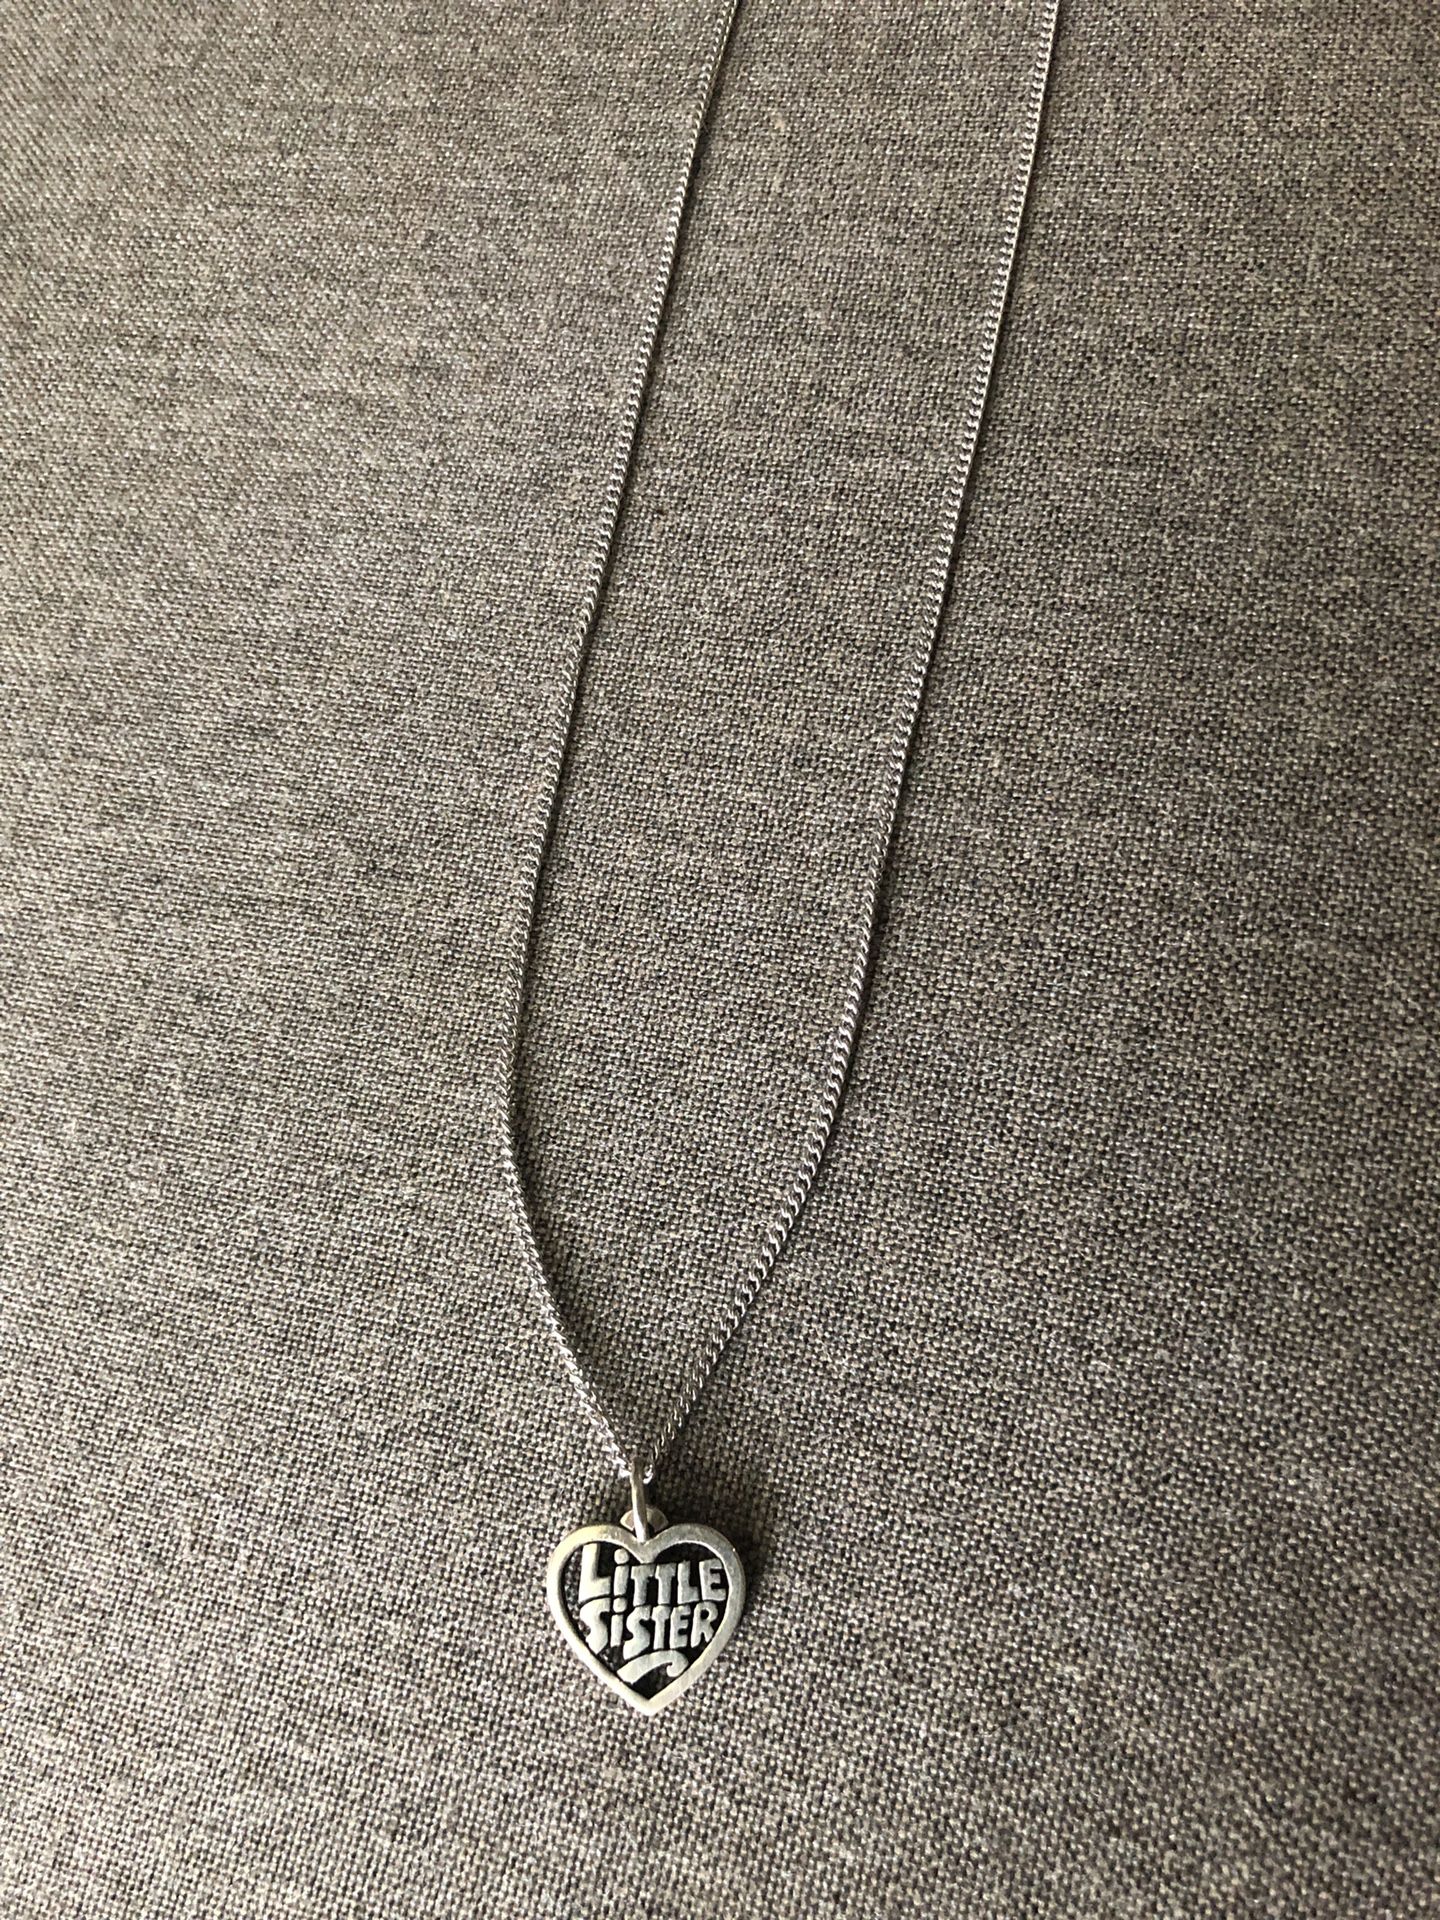 James Avery Little Sister “ Necklace